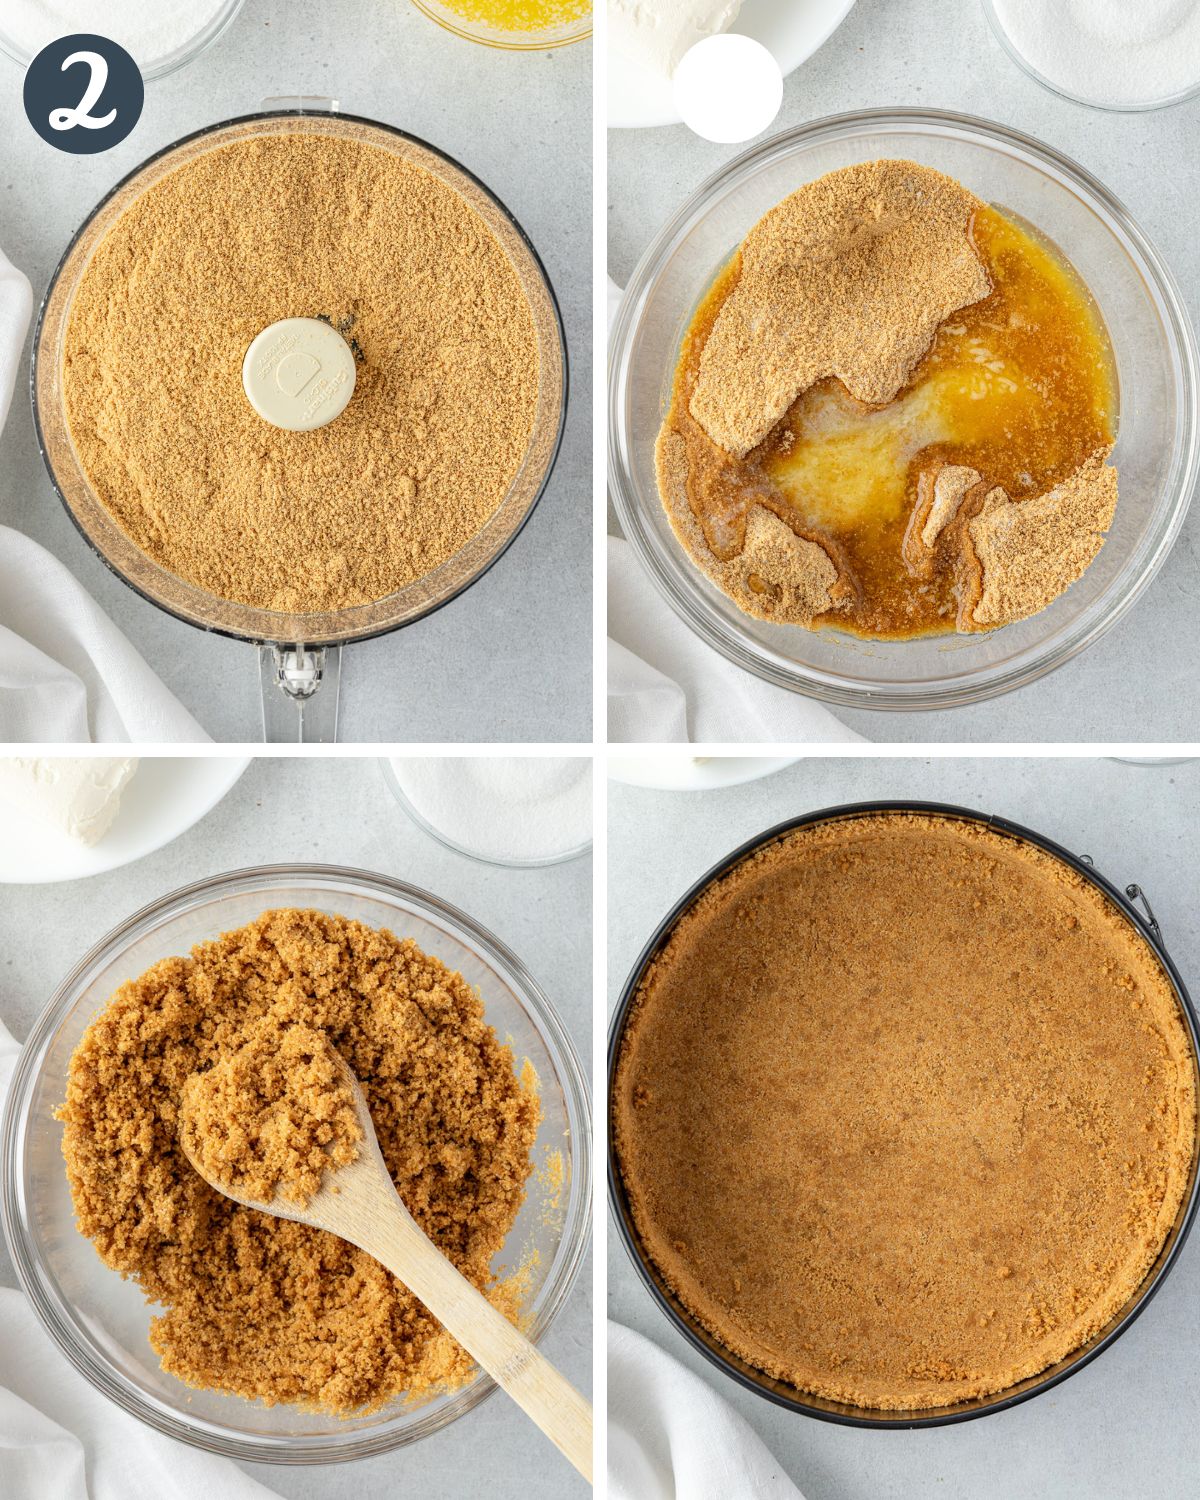 4 images showing the steps to make a graham cracker crust.